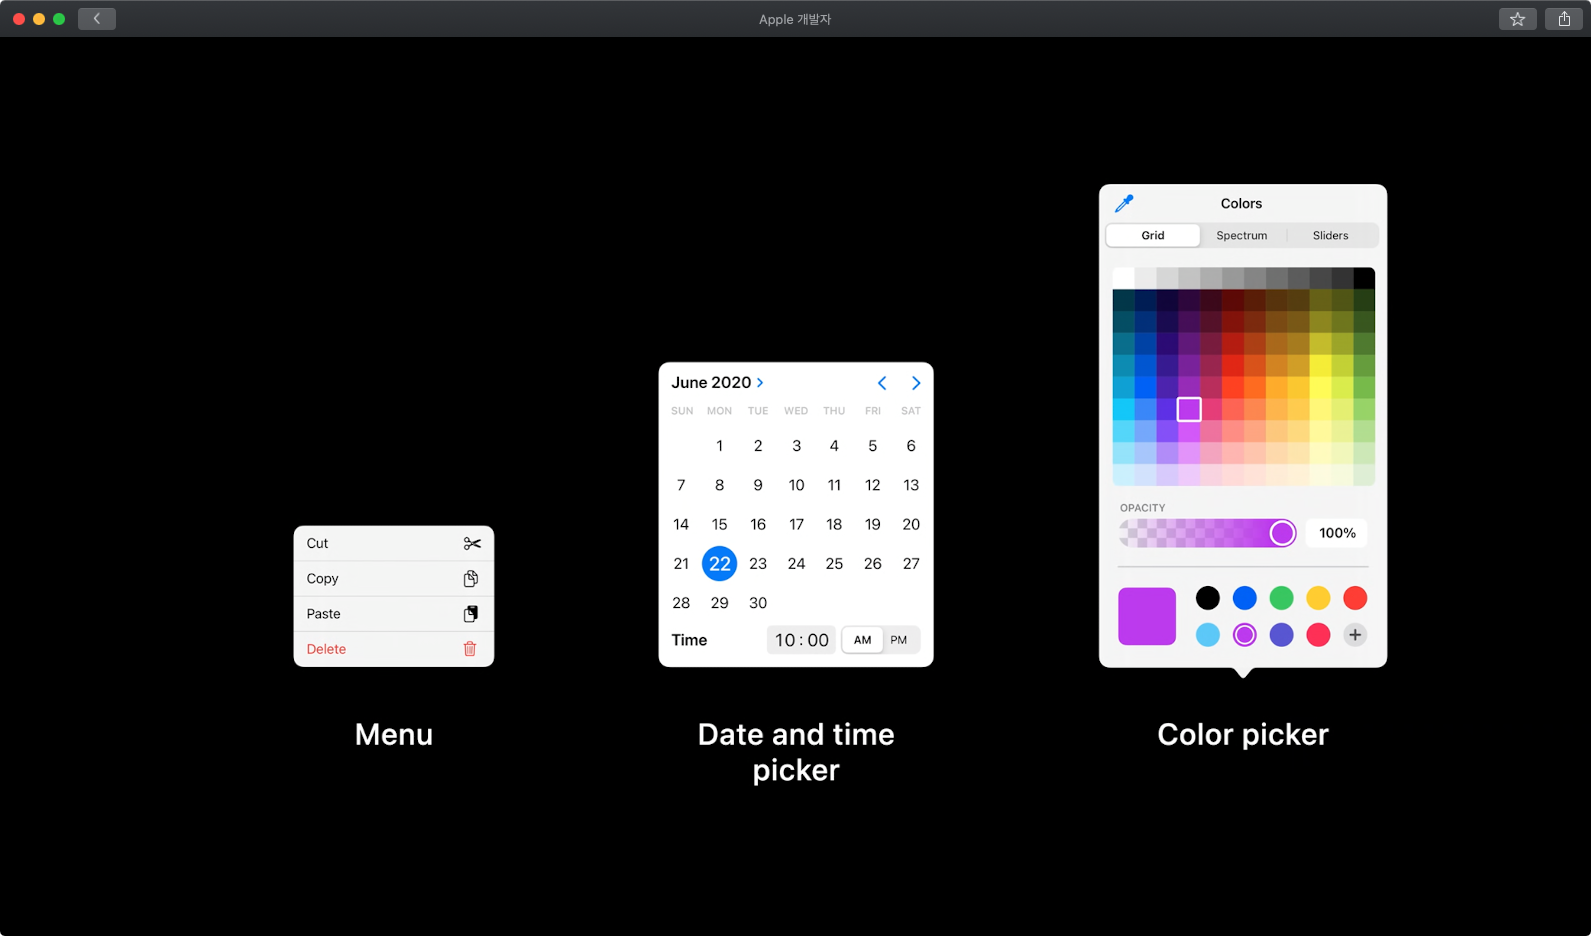 Menus, Date and Time picker, Color picker